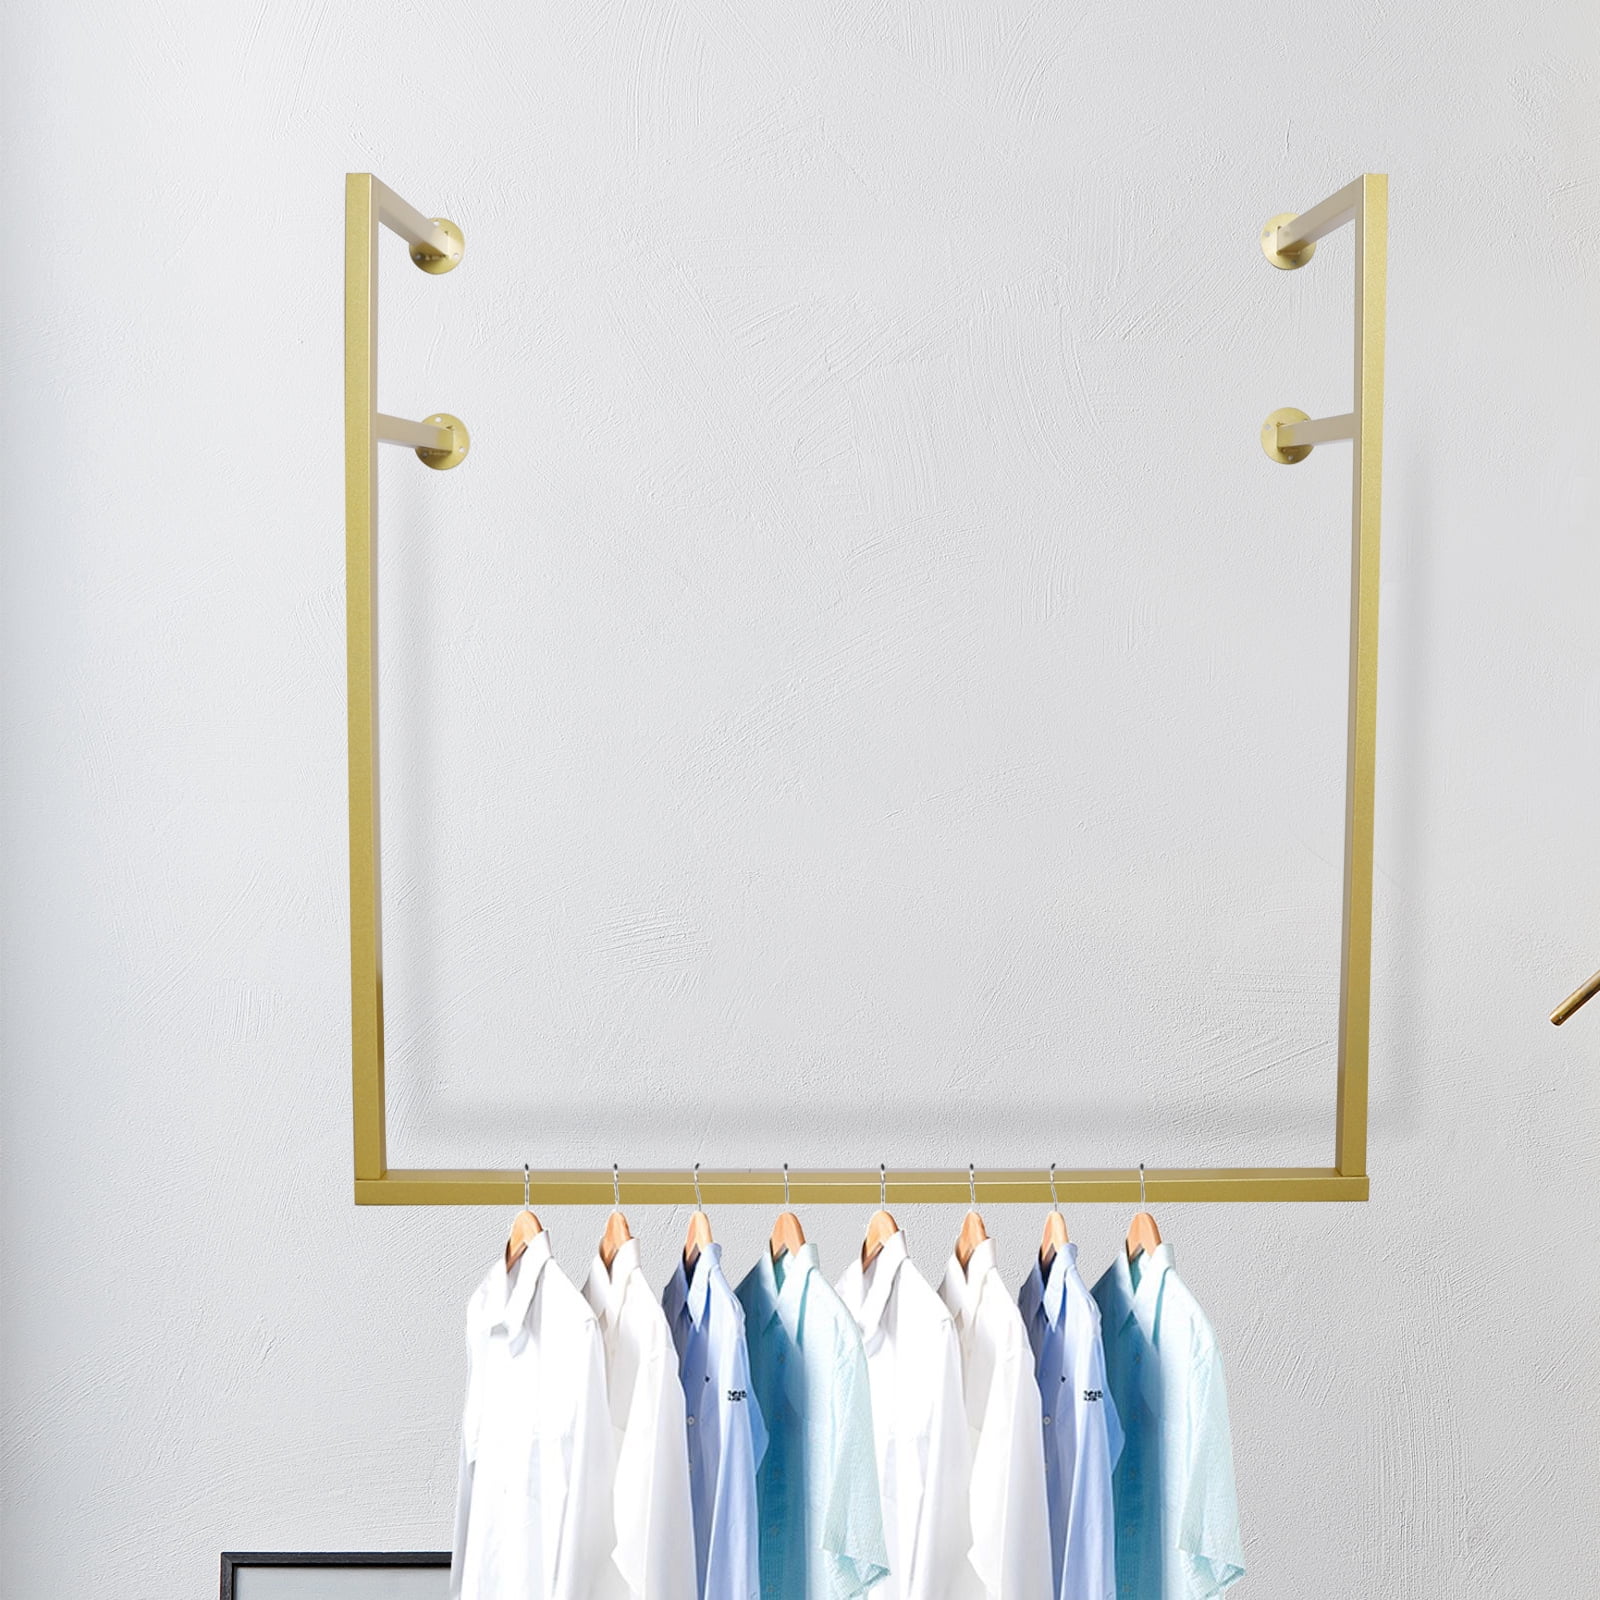 Miumaeov F-Shaped Clothes Rack Wall-mounted Gold Metal Closet Hanging ...